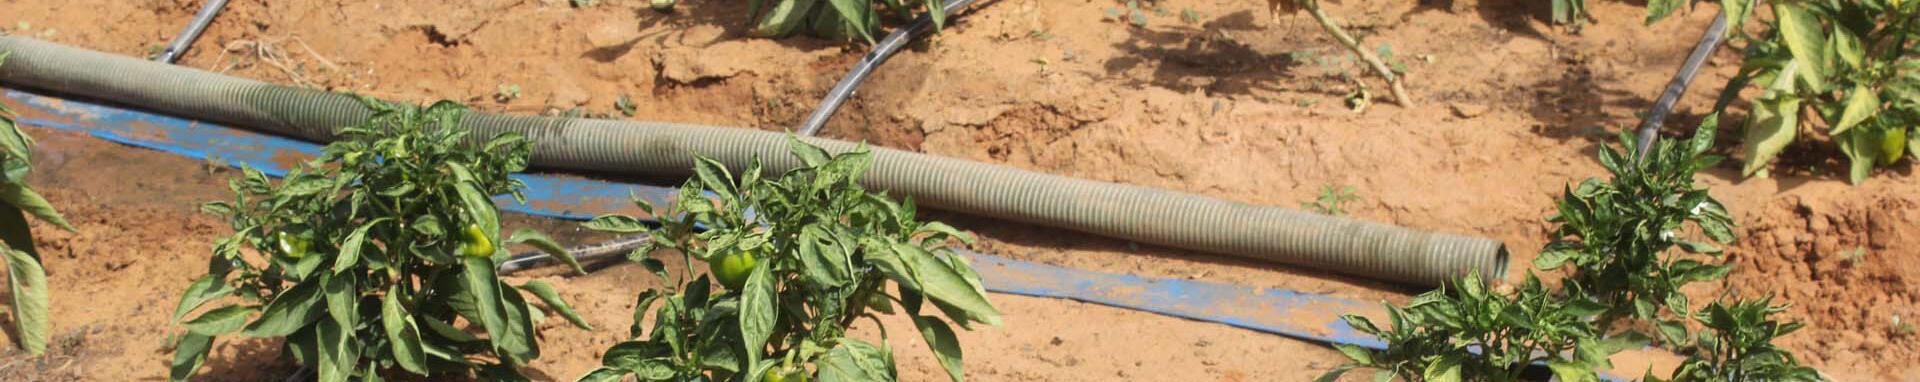 CIF ActionFollow Irrigation in cooperative plot produce in the community of Bangoubi, Niger- 